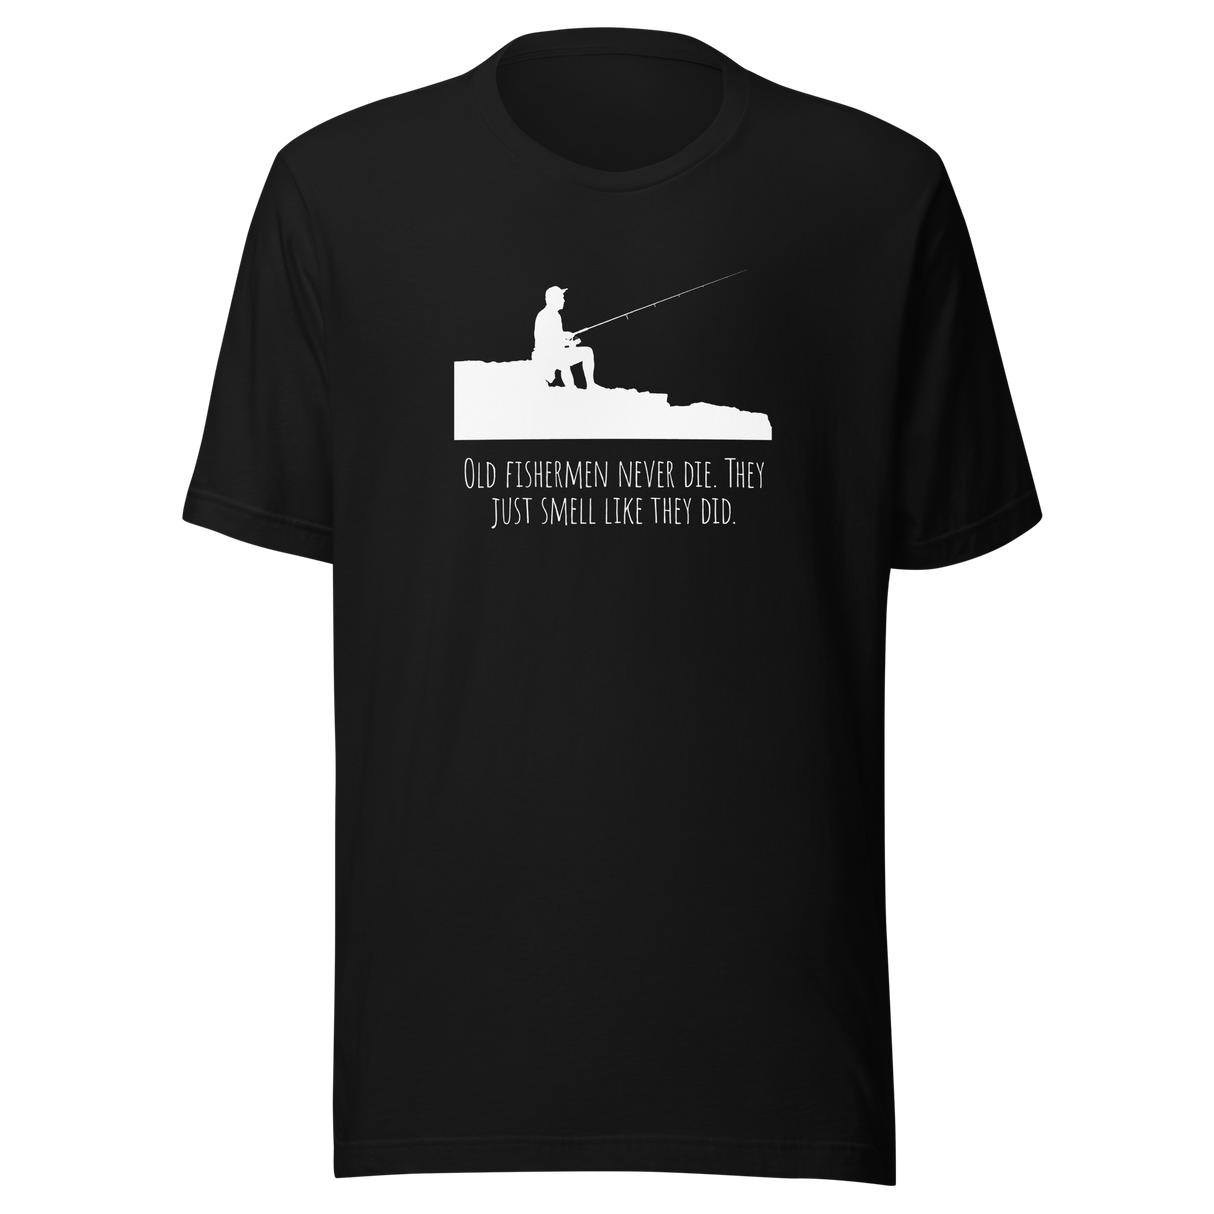 old-fishermen-never-die-they-just-smell-like-they-did-old-tee-fishermen-t-shirt-never-die-tee-funny-t-shirt-sports-tee#color_black